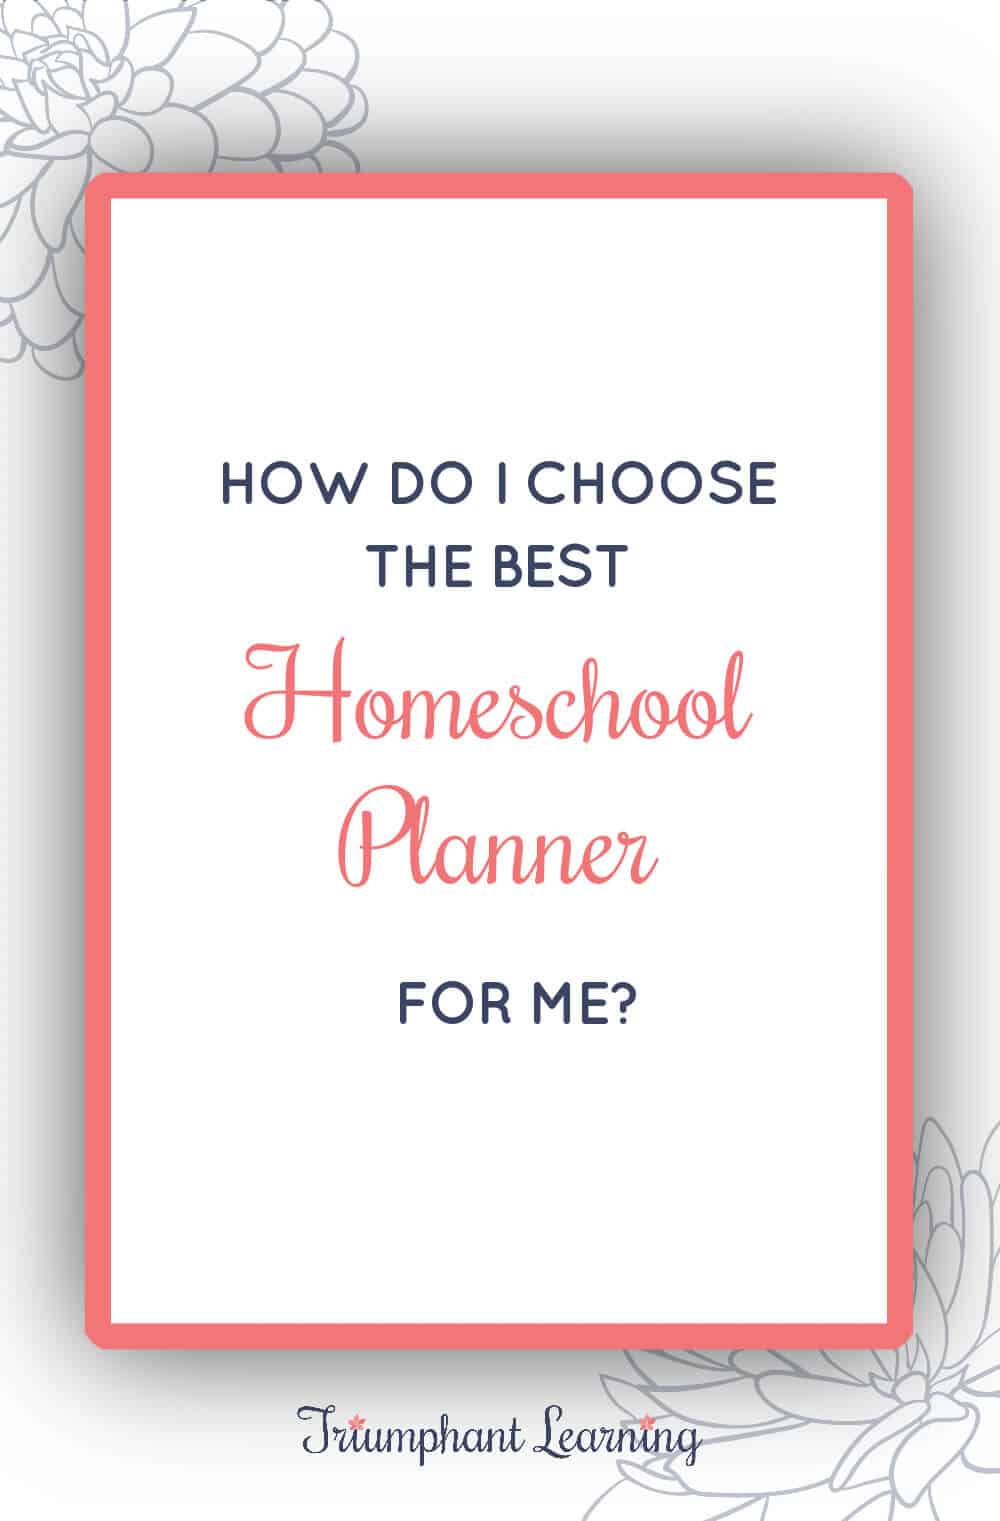 There's not a one-size fits all solution, but these questions will help you decide which homeschool planner is right for you. via @TriLearning